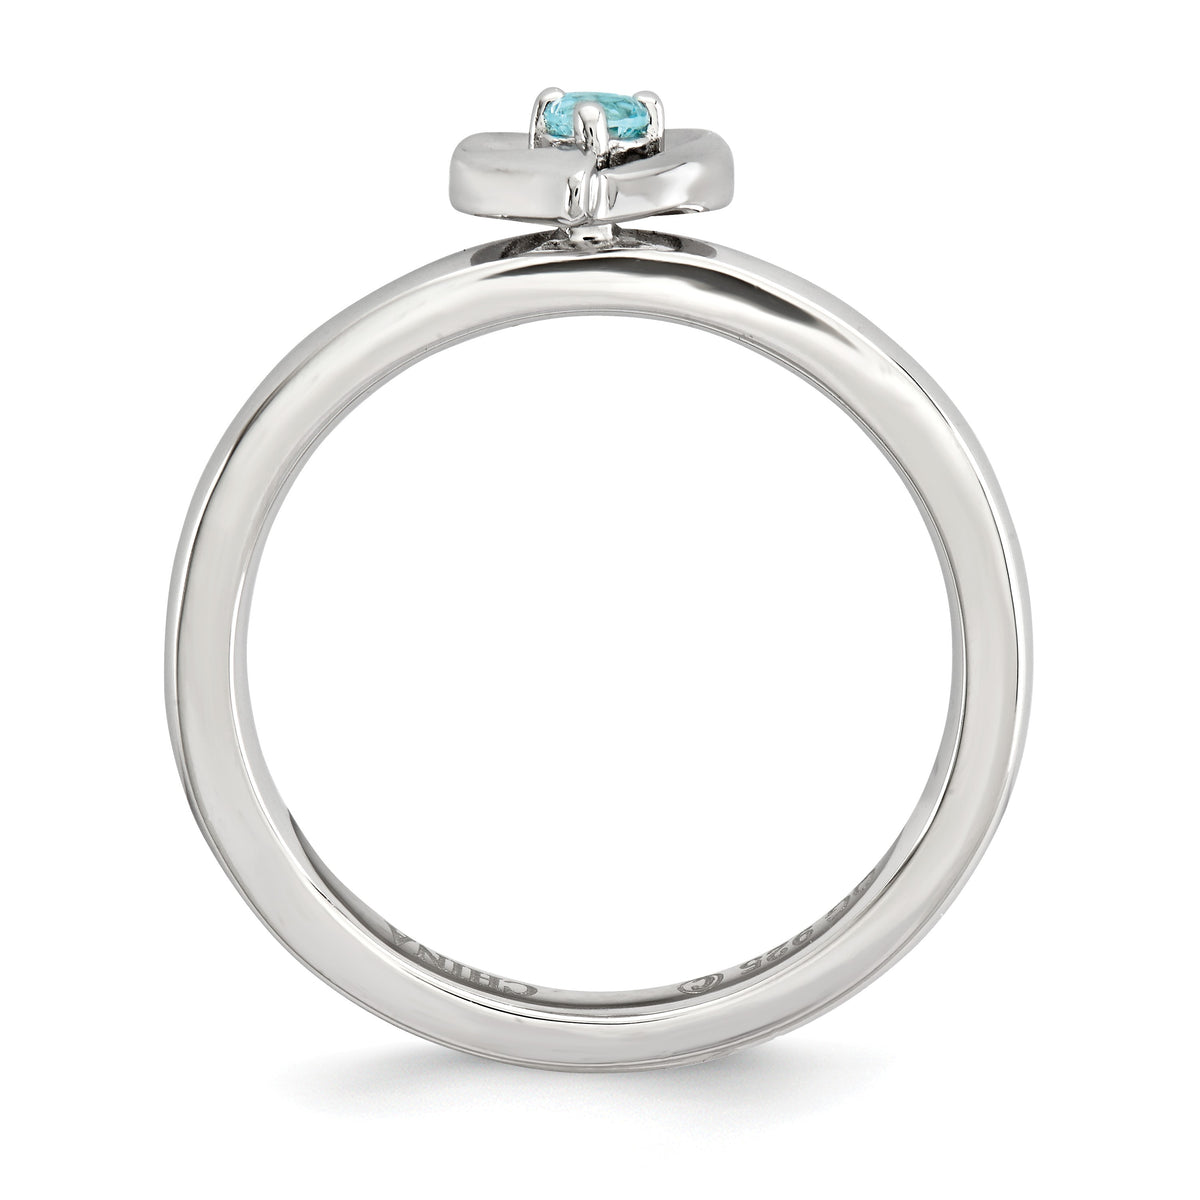 Alternate view of the Sterling Silver Stackable Expressions Blue Topaz 6mm Heart Ring by The Black Bow Jewelry Co.